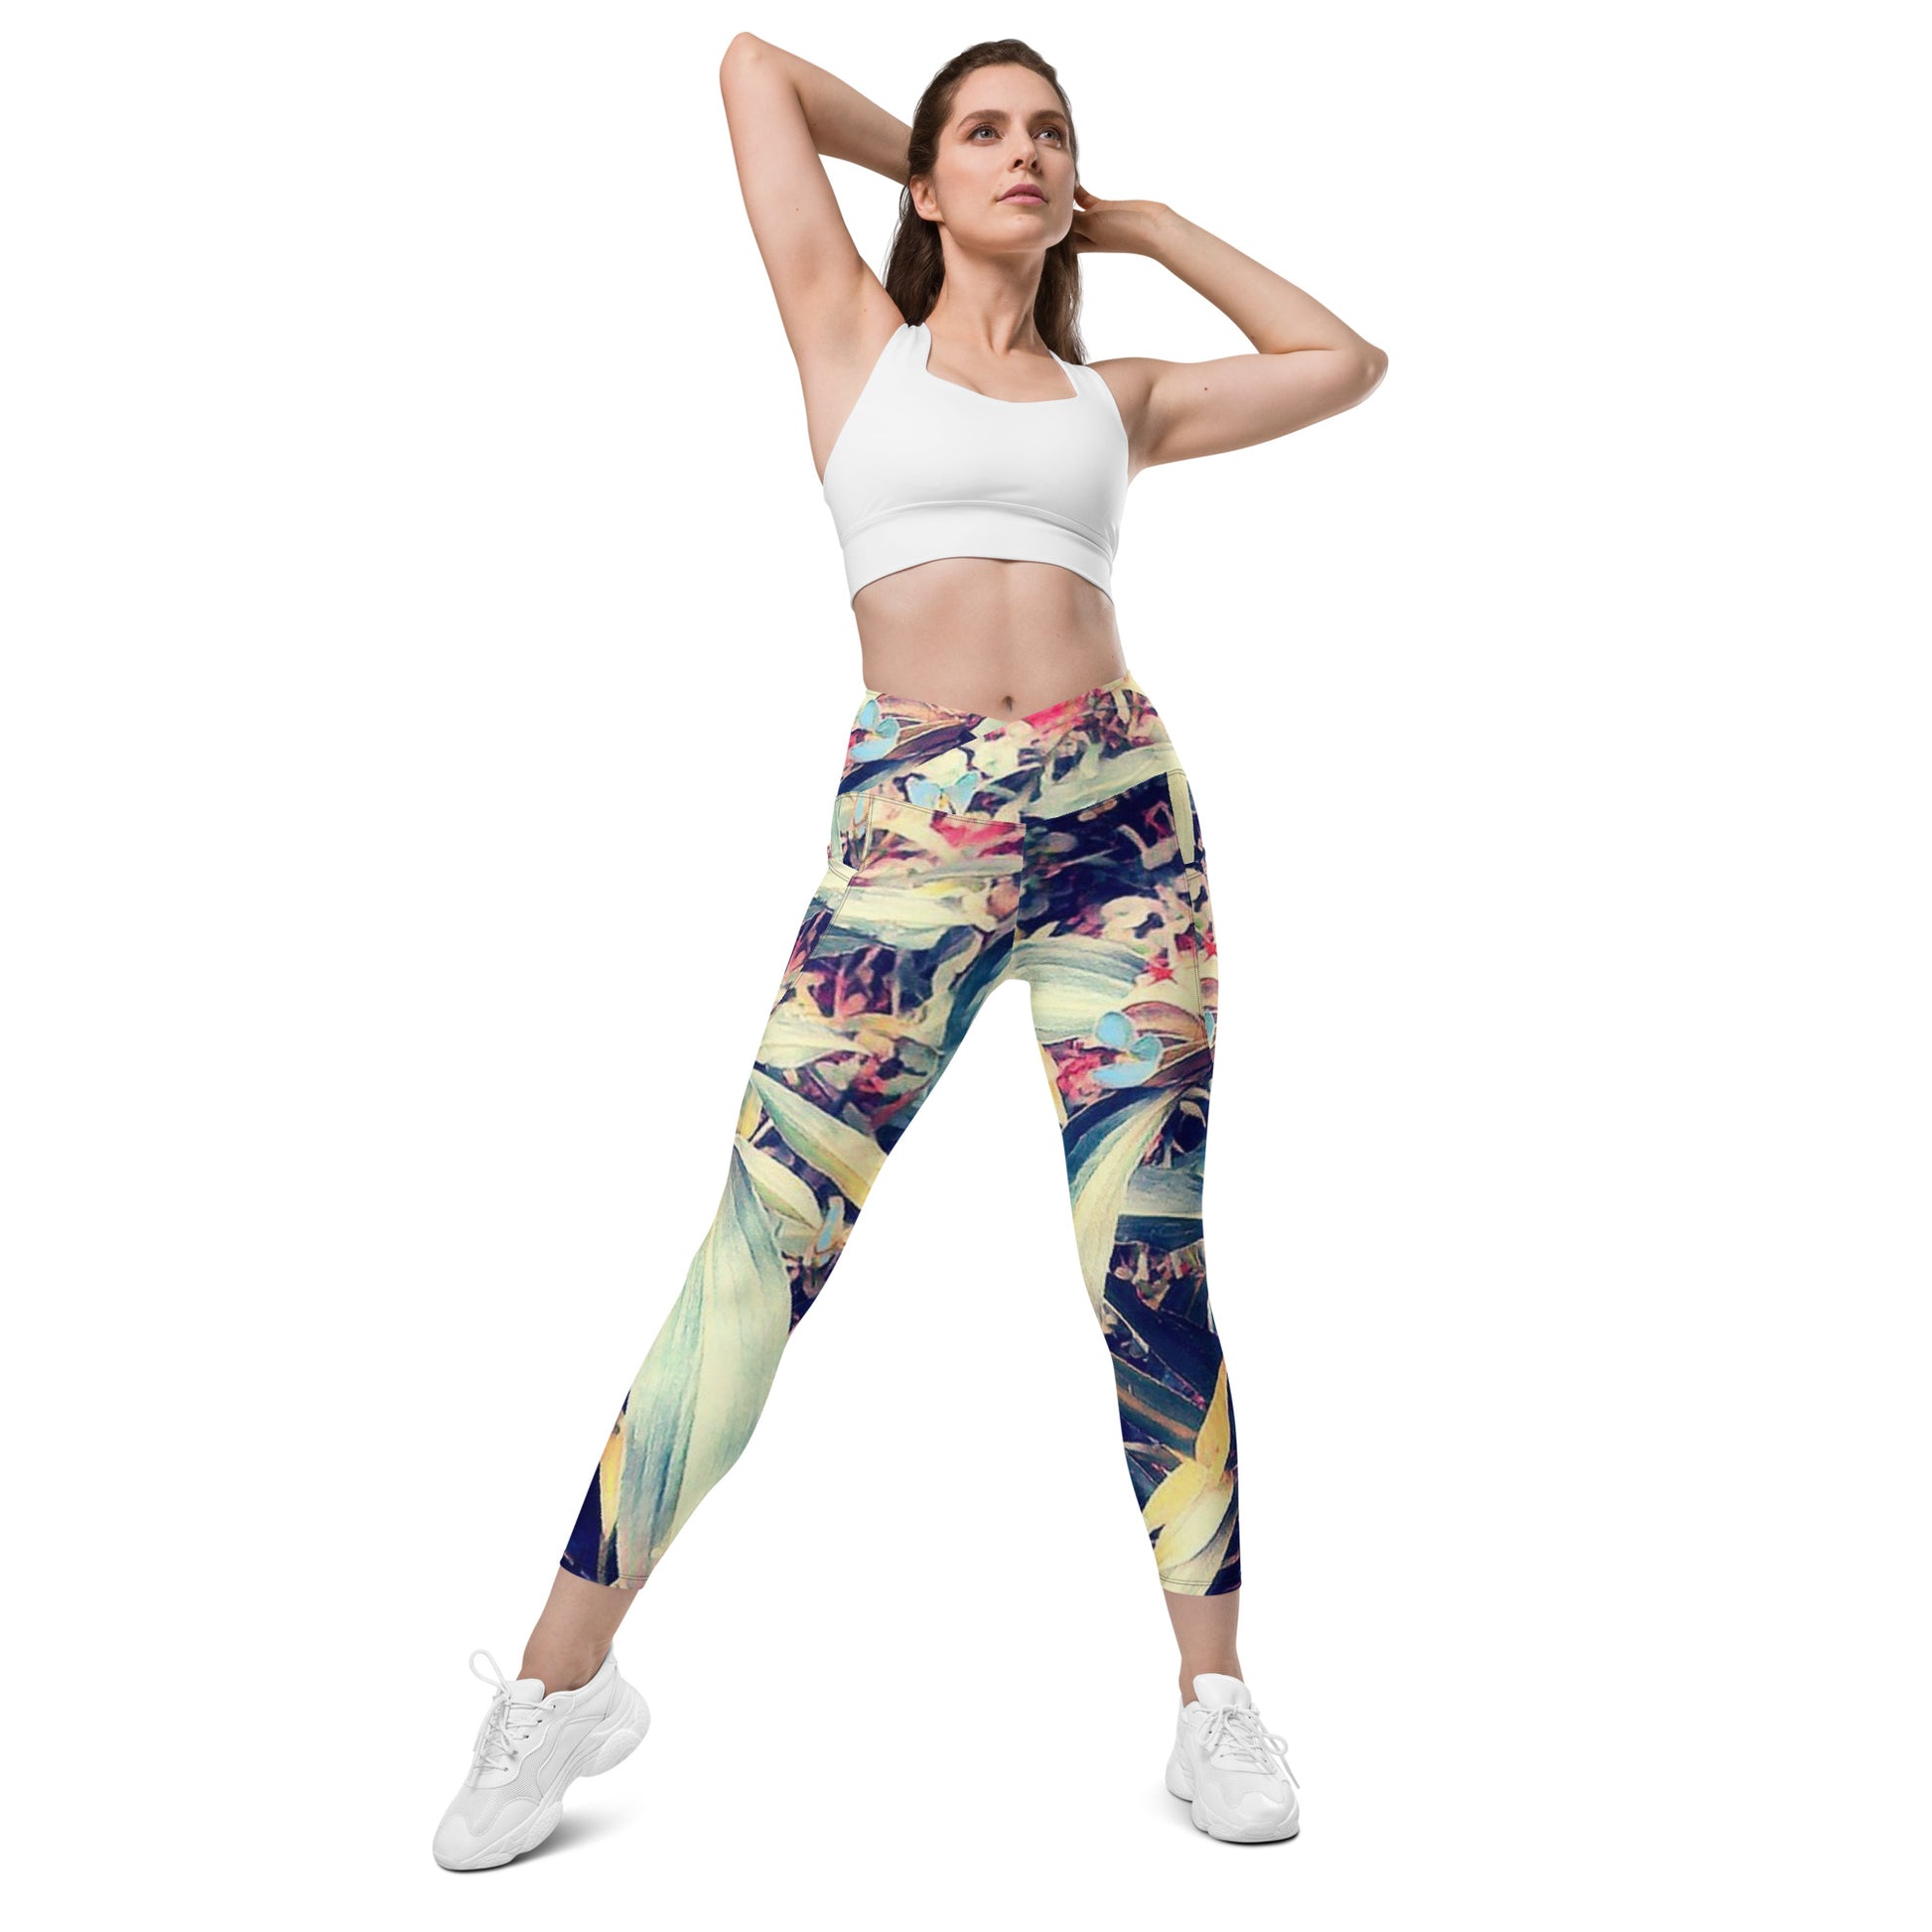 Tropical Crossover leggings with pockets - A. Mandaline Art